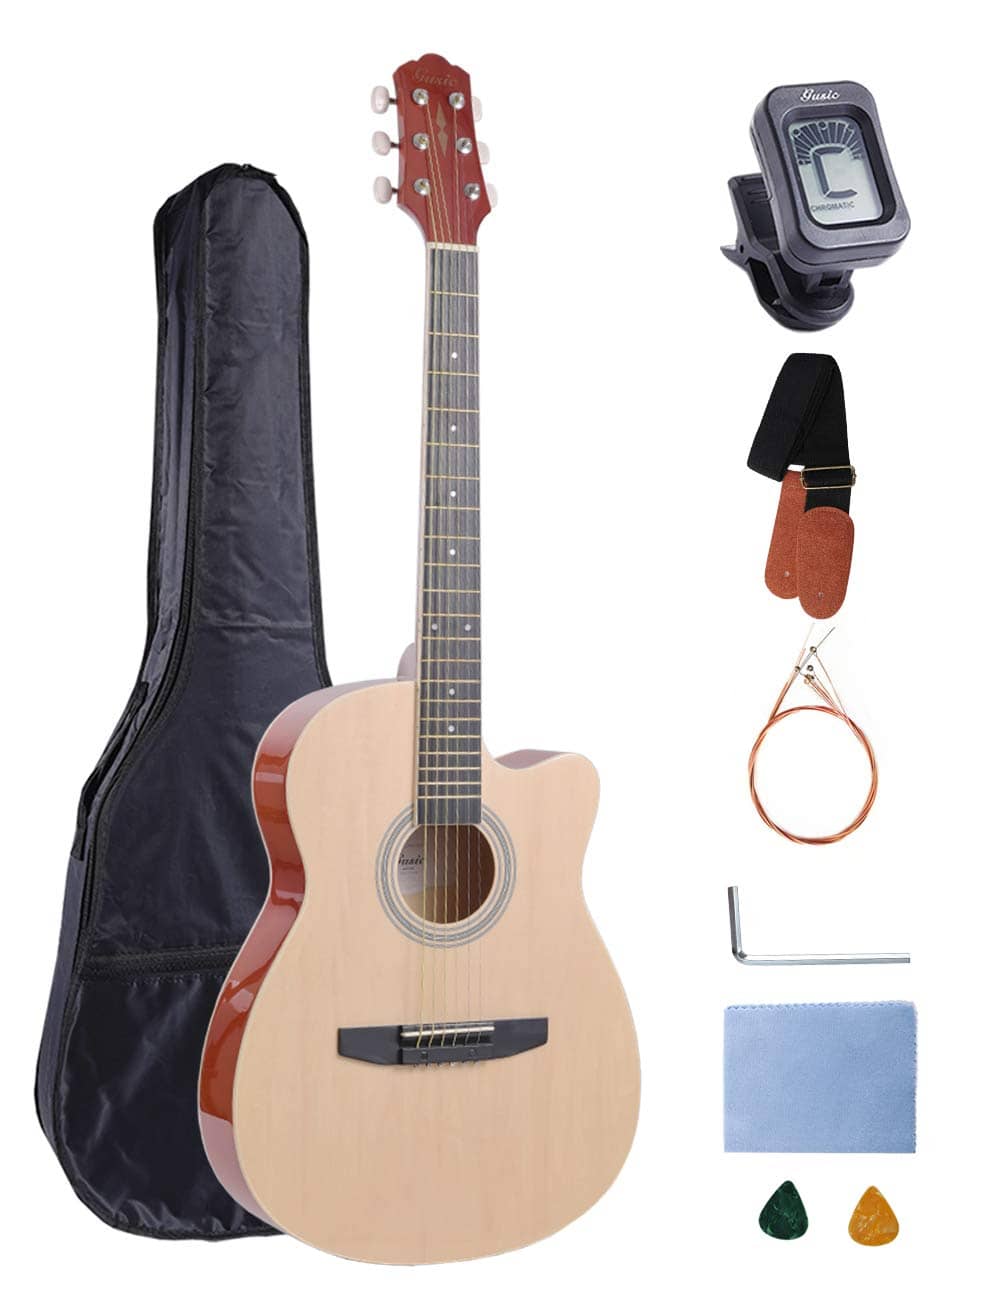 Acoustic Guitar Beginner Kid Guitar 38 Inch Steel Strings Guitar Starter Bundle Cutaway with Gig Bag Clip Tuner Strap 2 Picks and Wipe for Student Child Adult Learn to Play 8